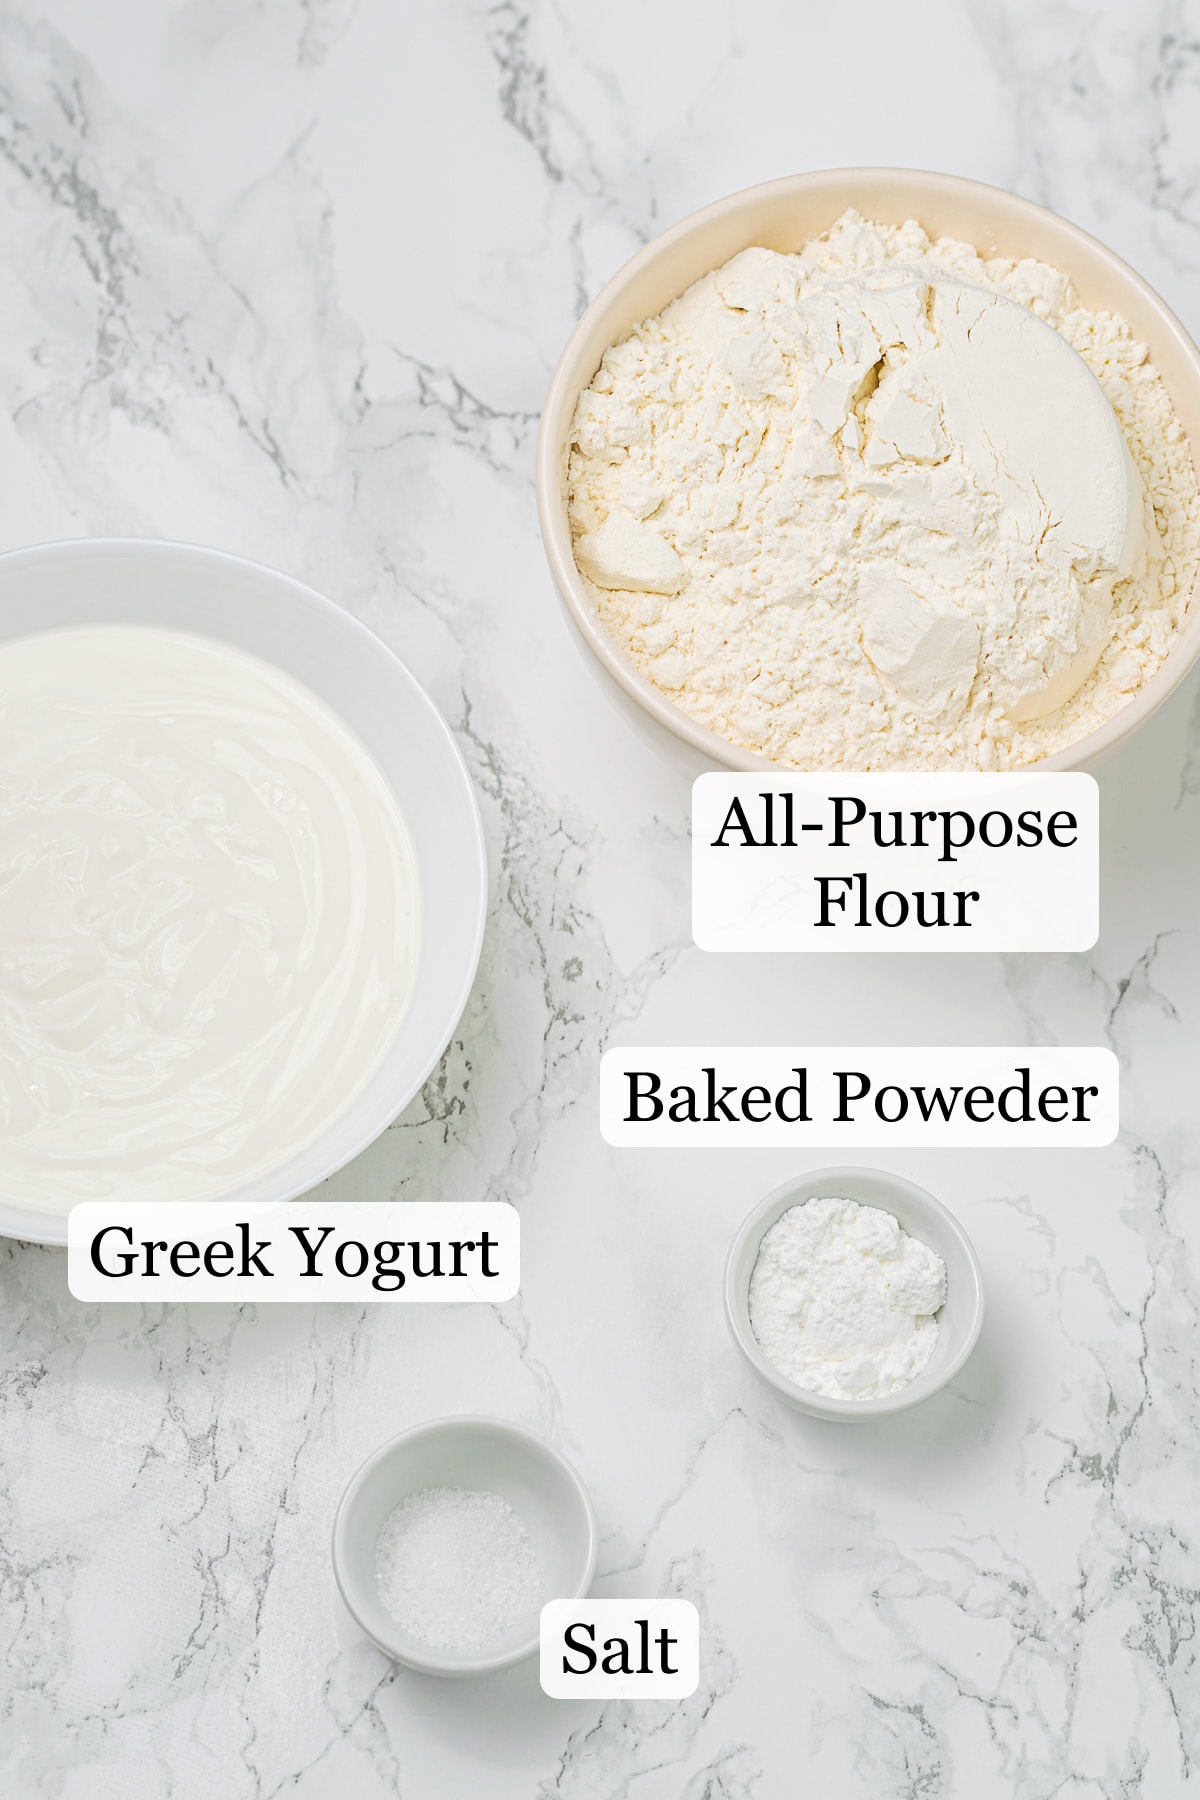 Ingredients for flatbread recipe including bowls of flour, yogurt, baking powder, and salt on a marble countertop.